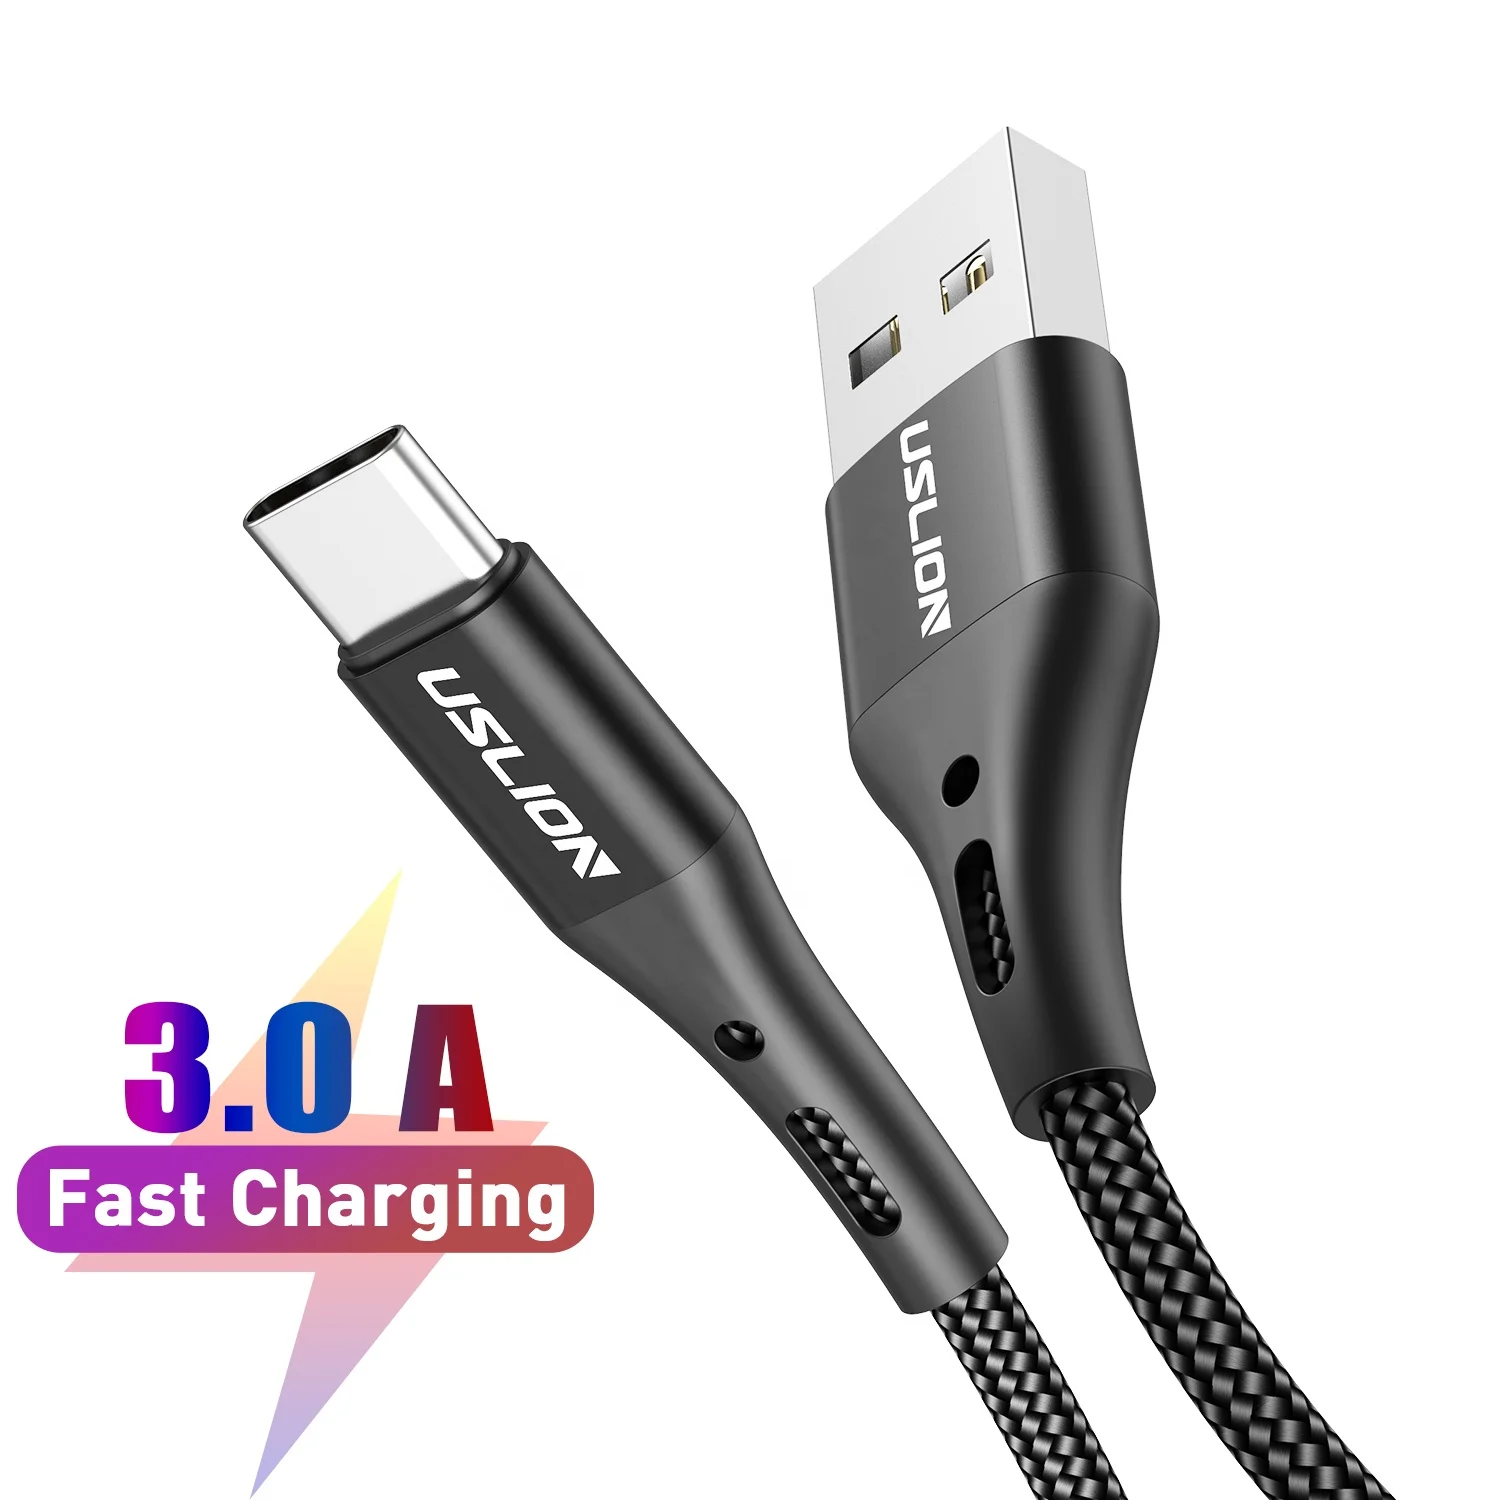 

USLION 3A USB Type C Cable Fast Charging Wire for Samsung S9 S8 S10 Xiaomi mi9 mi8 Huawei Mobile Phone USB C Charger Cable 3m, Black/red/blue/purple